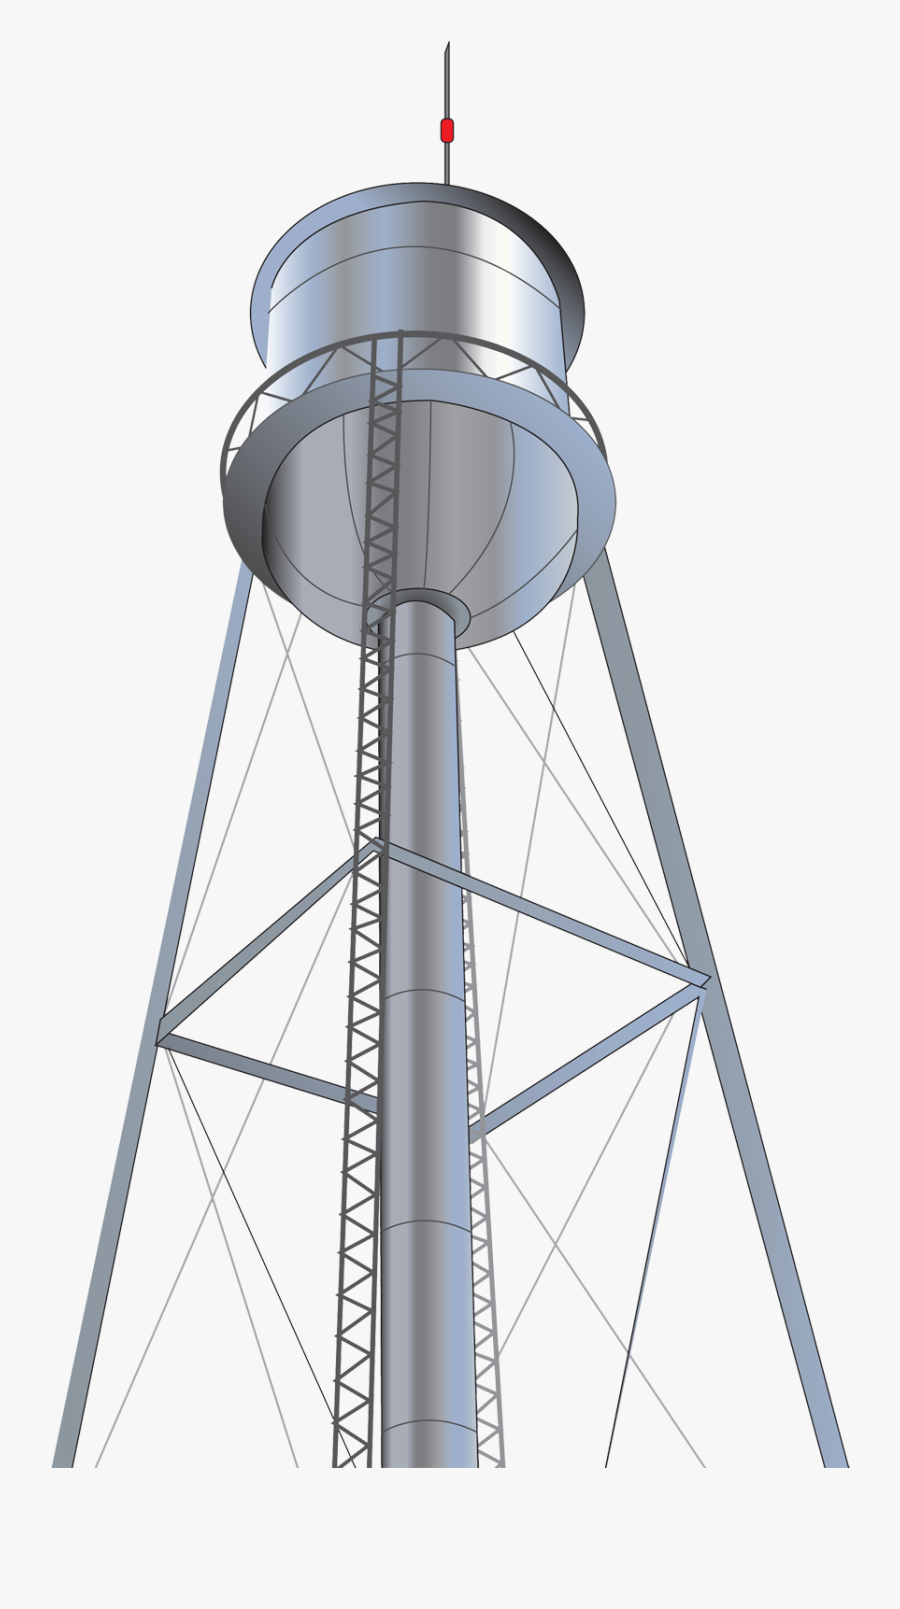 Water Tower Clip Art Png Free - Water Tower Transparent, Transparent Clipart